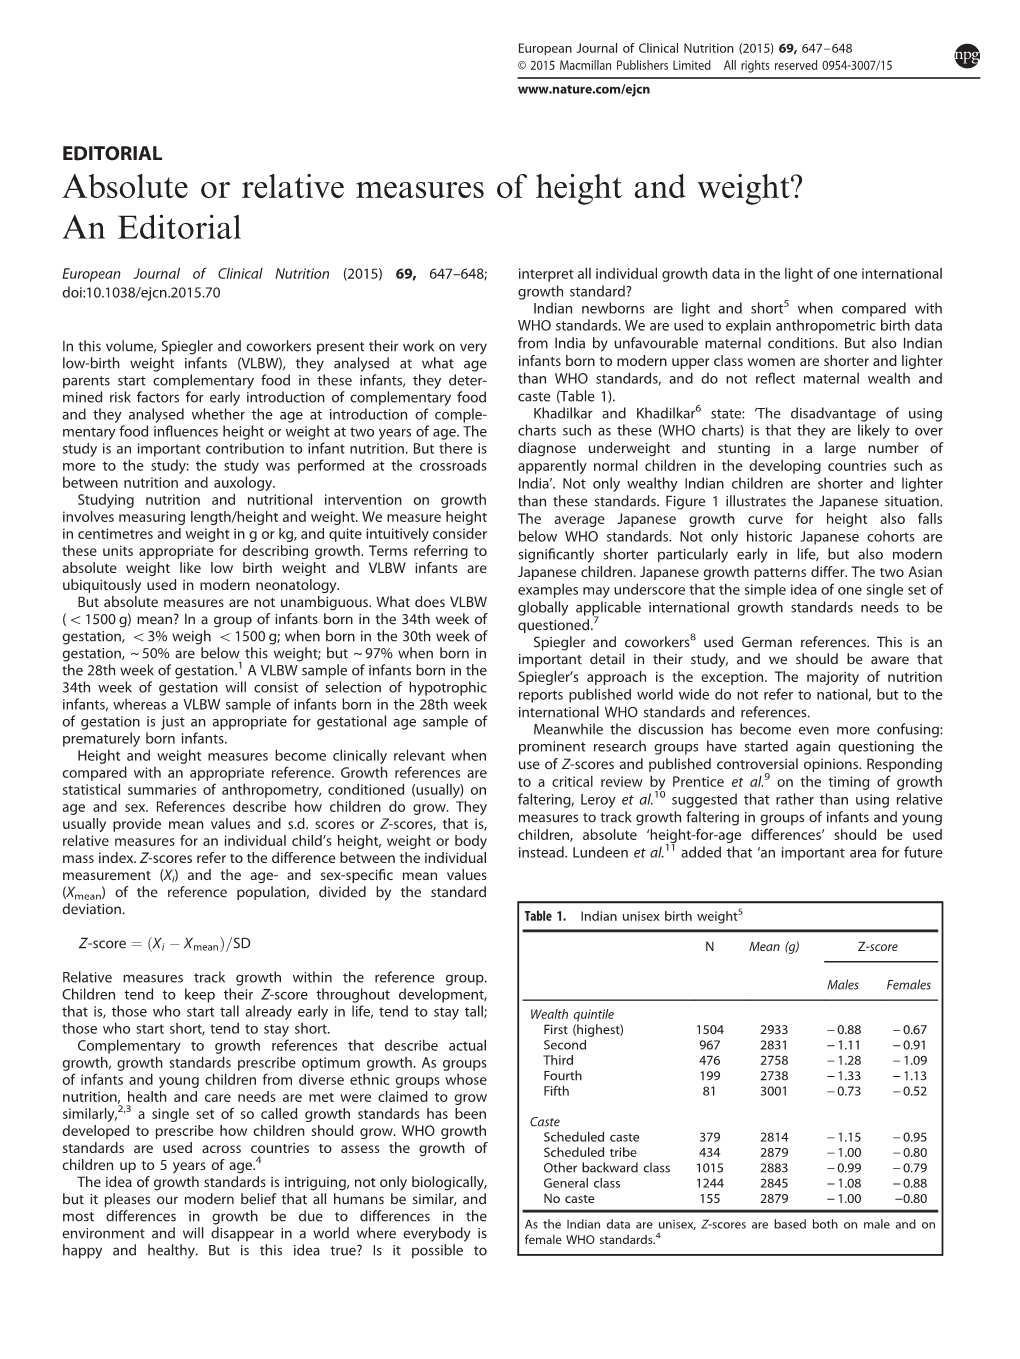 Absolute Or Relative Measures of Height and Weight&Quest